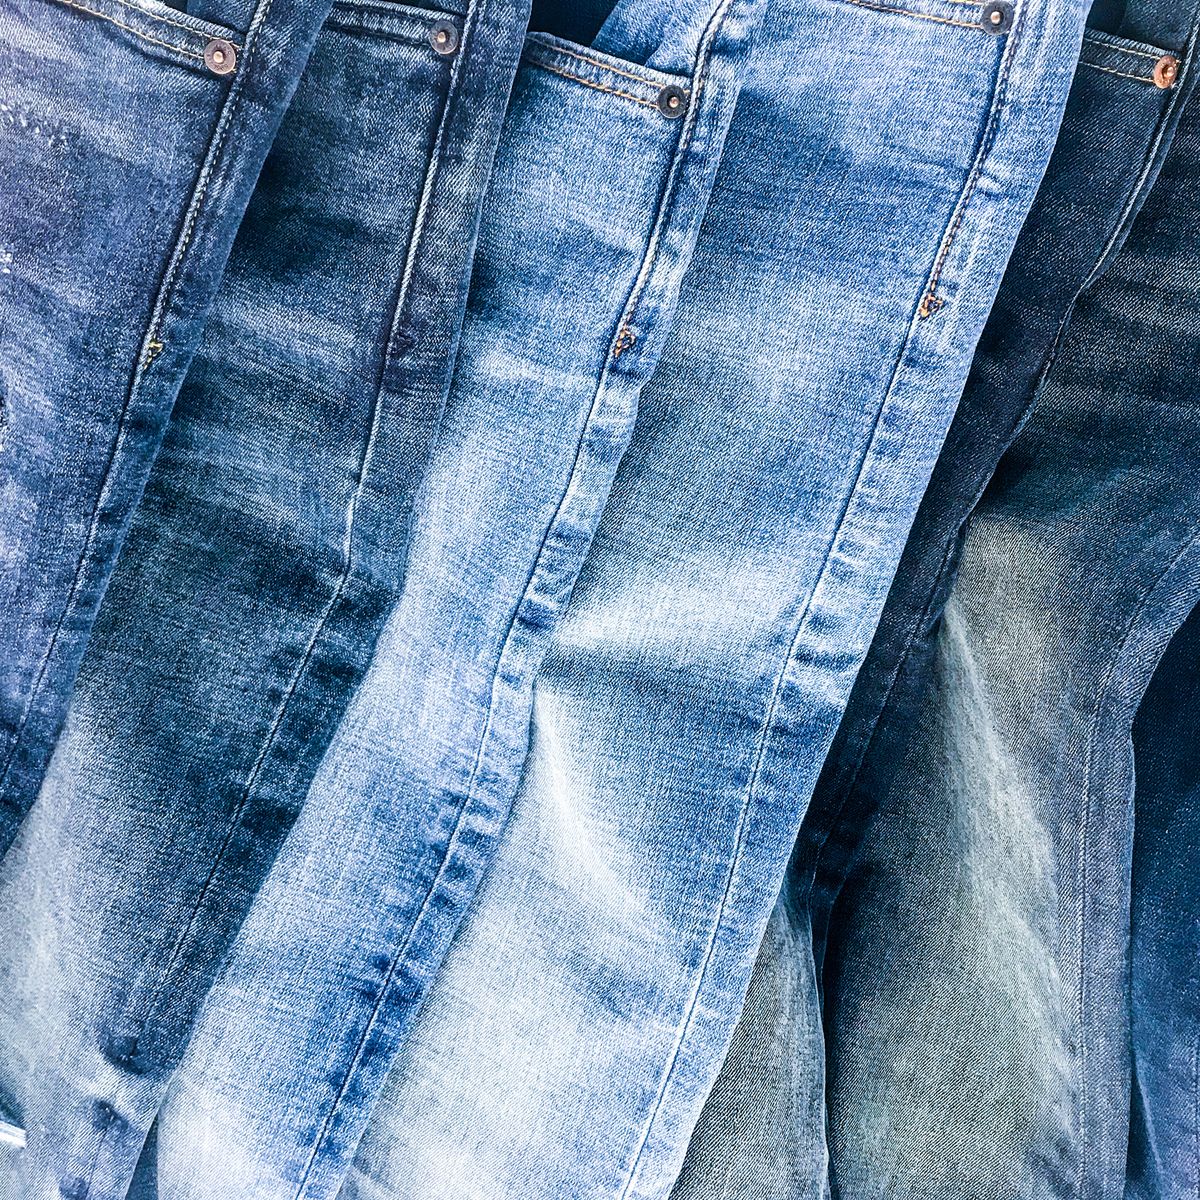 How often should you wash your jeans? Levi's CEO settles debate